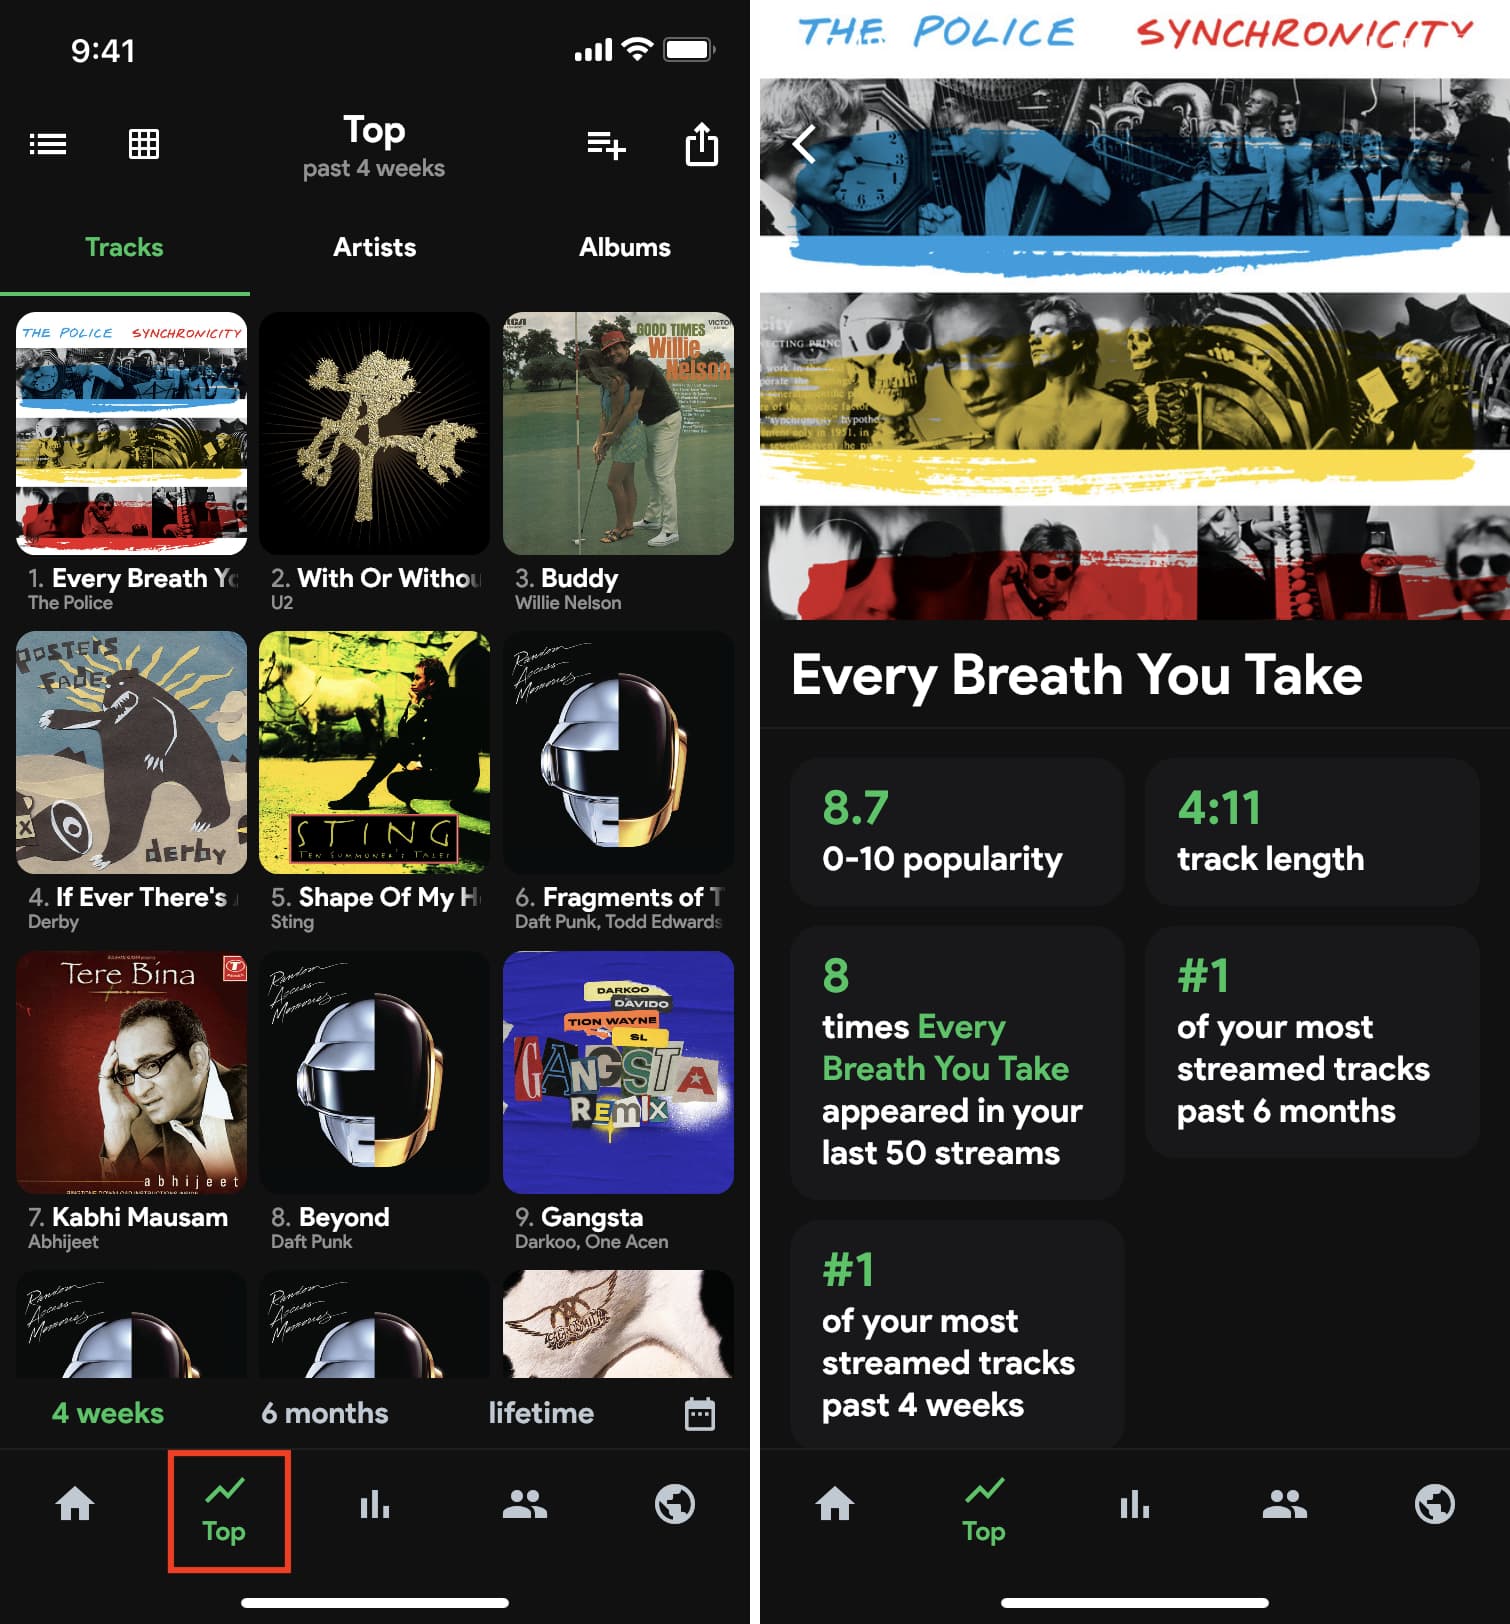 Using Spotistats or stats.fm on iPhone to see top Spotify tracks, artists, and other Spotify stats